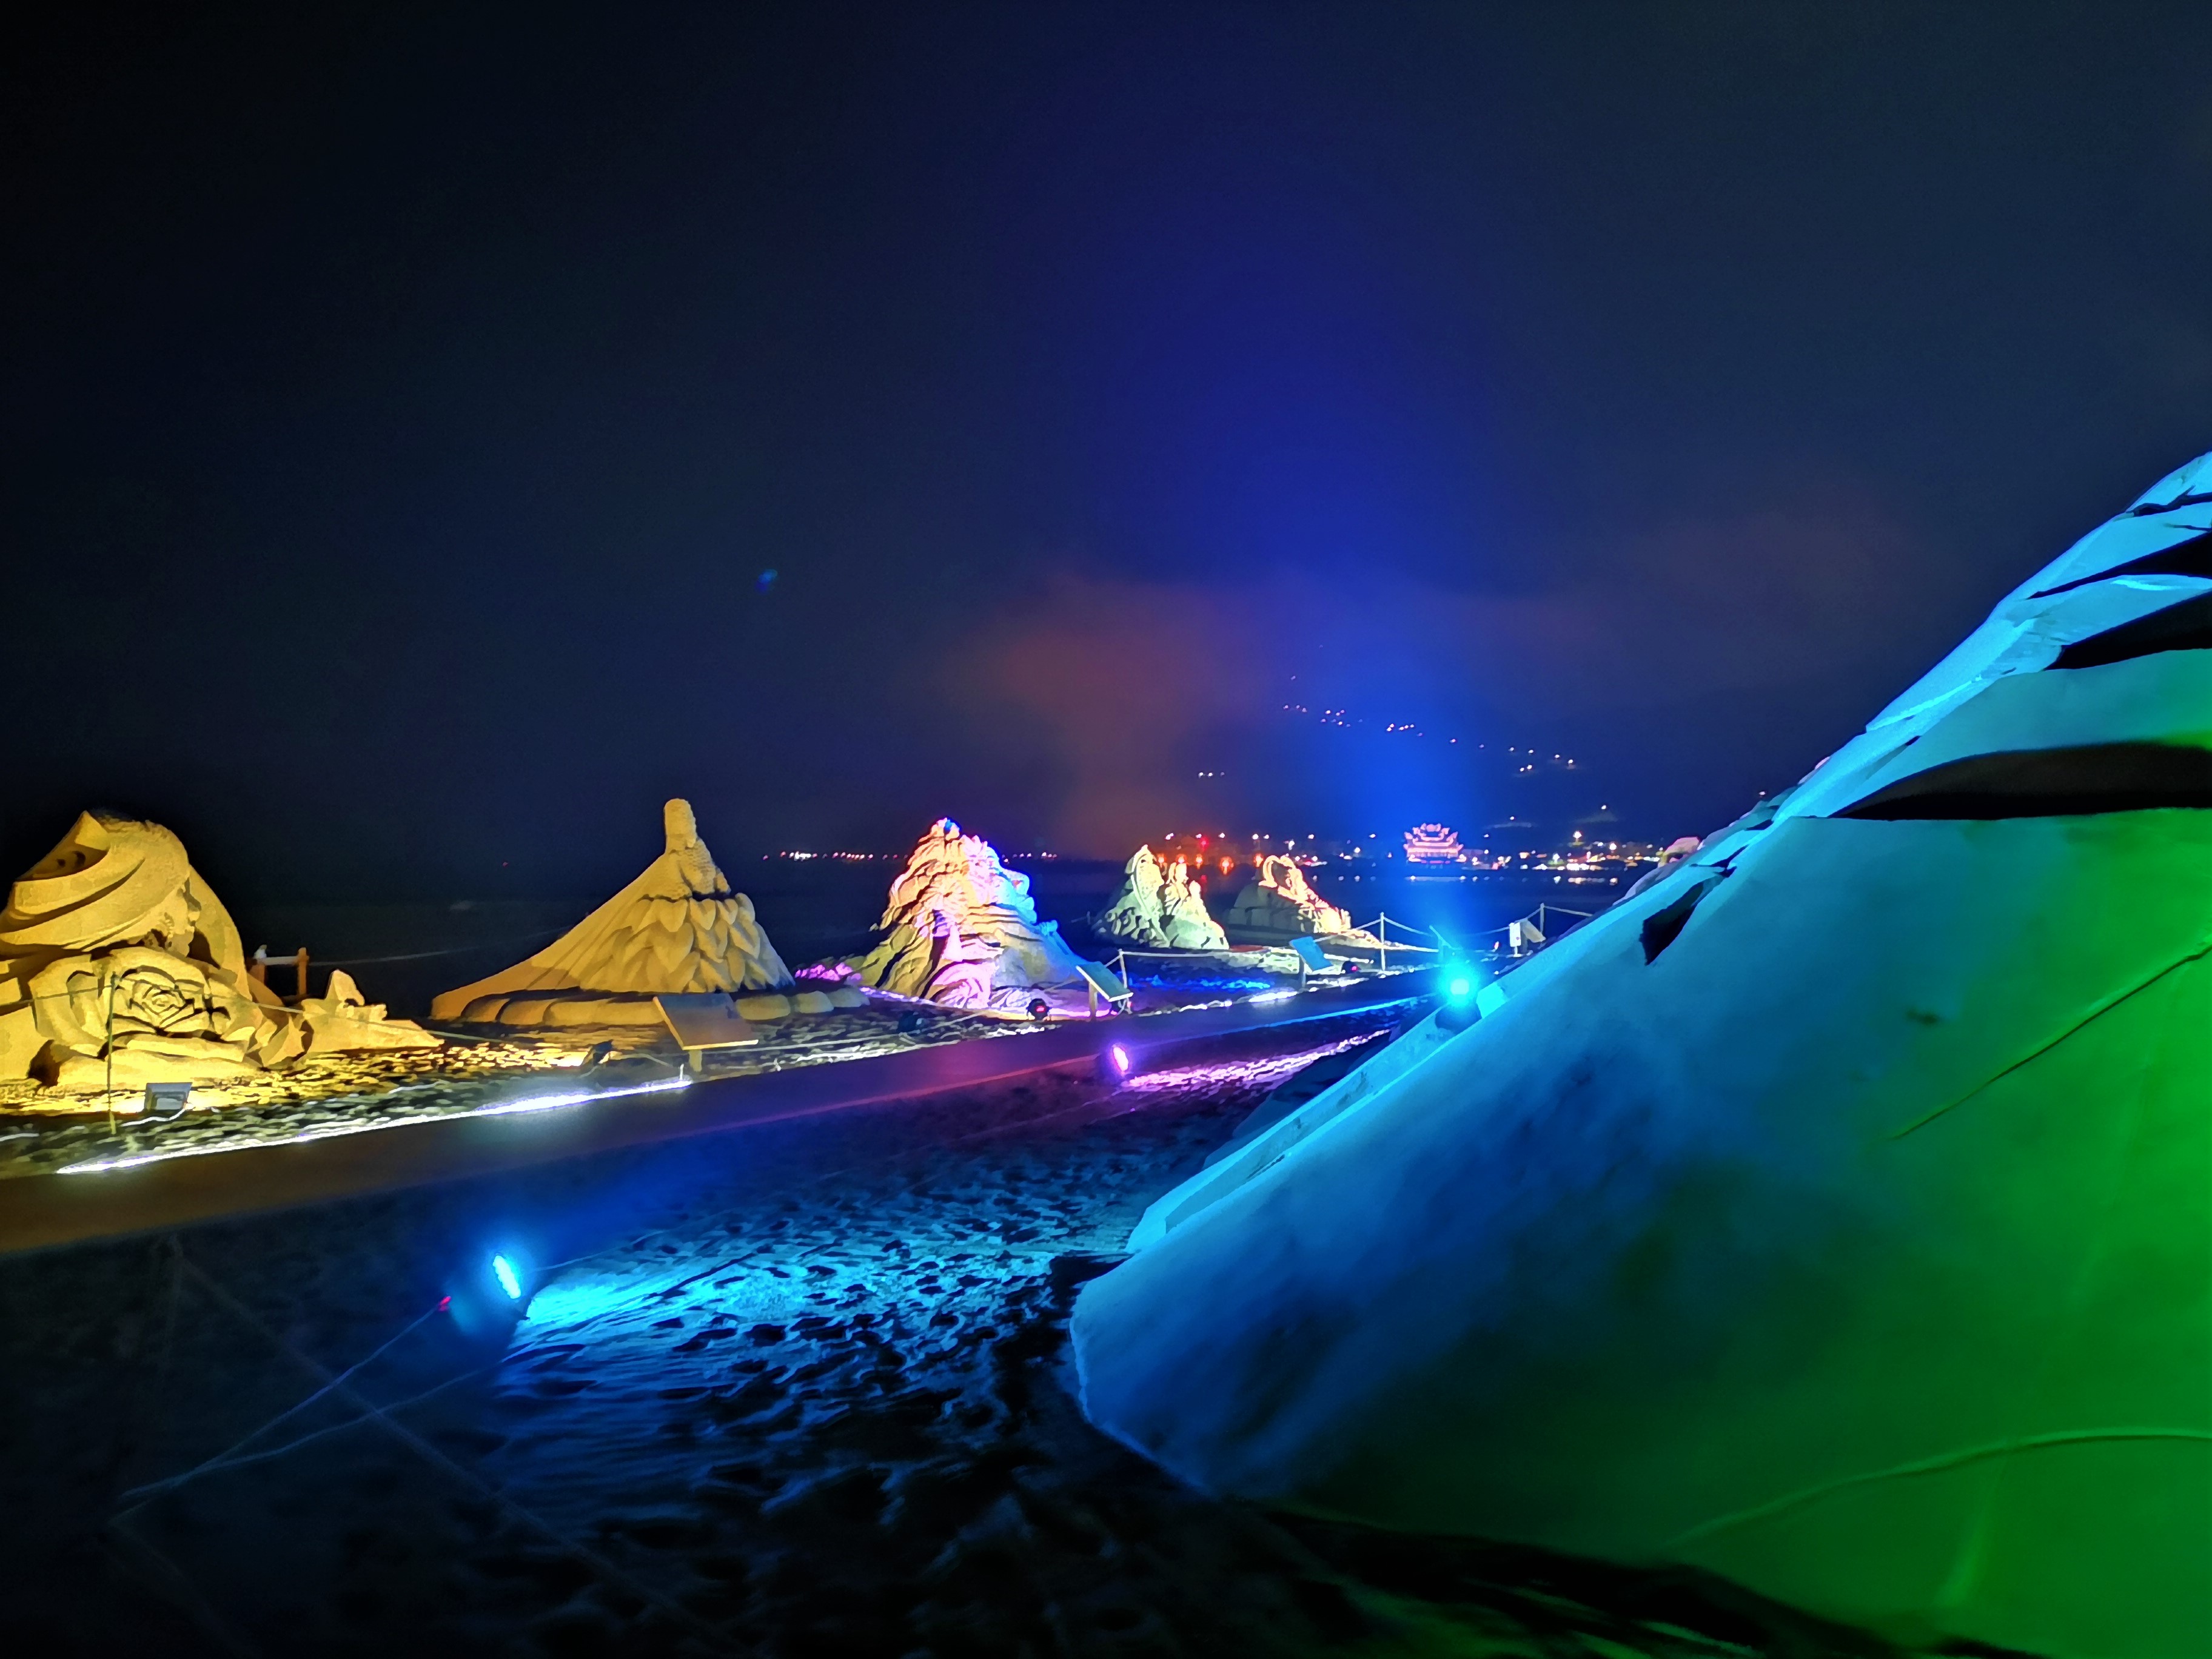 Fu Rongtu said that the 4-Fulong Night Sand Sculpture Exhibition was grandly launched from 6.1 to 7.15.